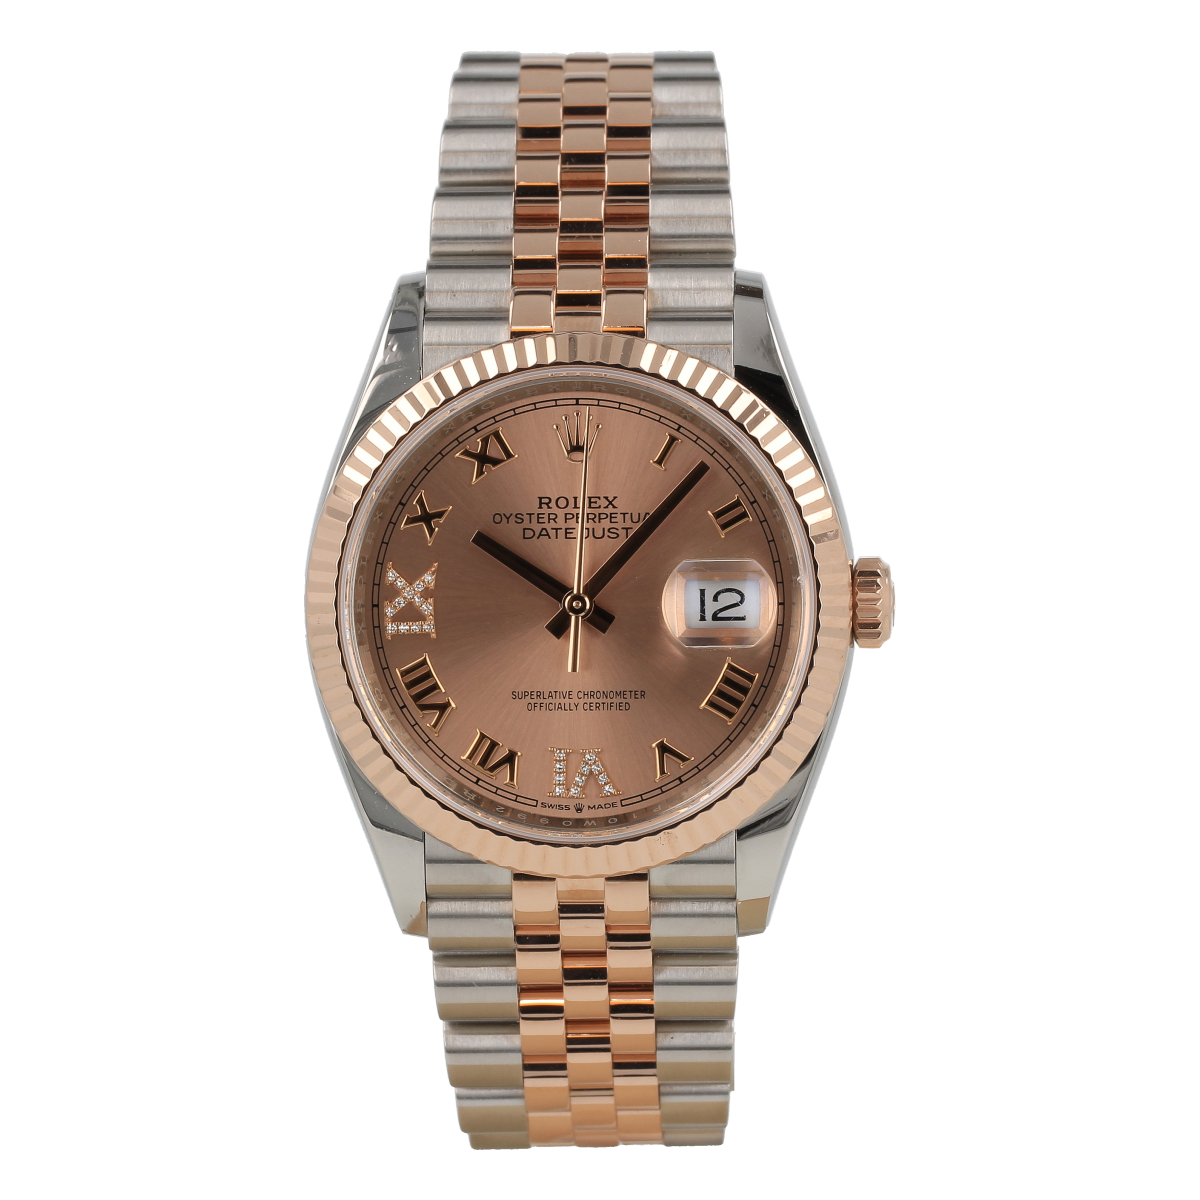 Rolex Datejust 126231 36mm Steel and rose gold, pink dial, bracelet jubilee | Buy pre-owned Rolex watch